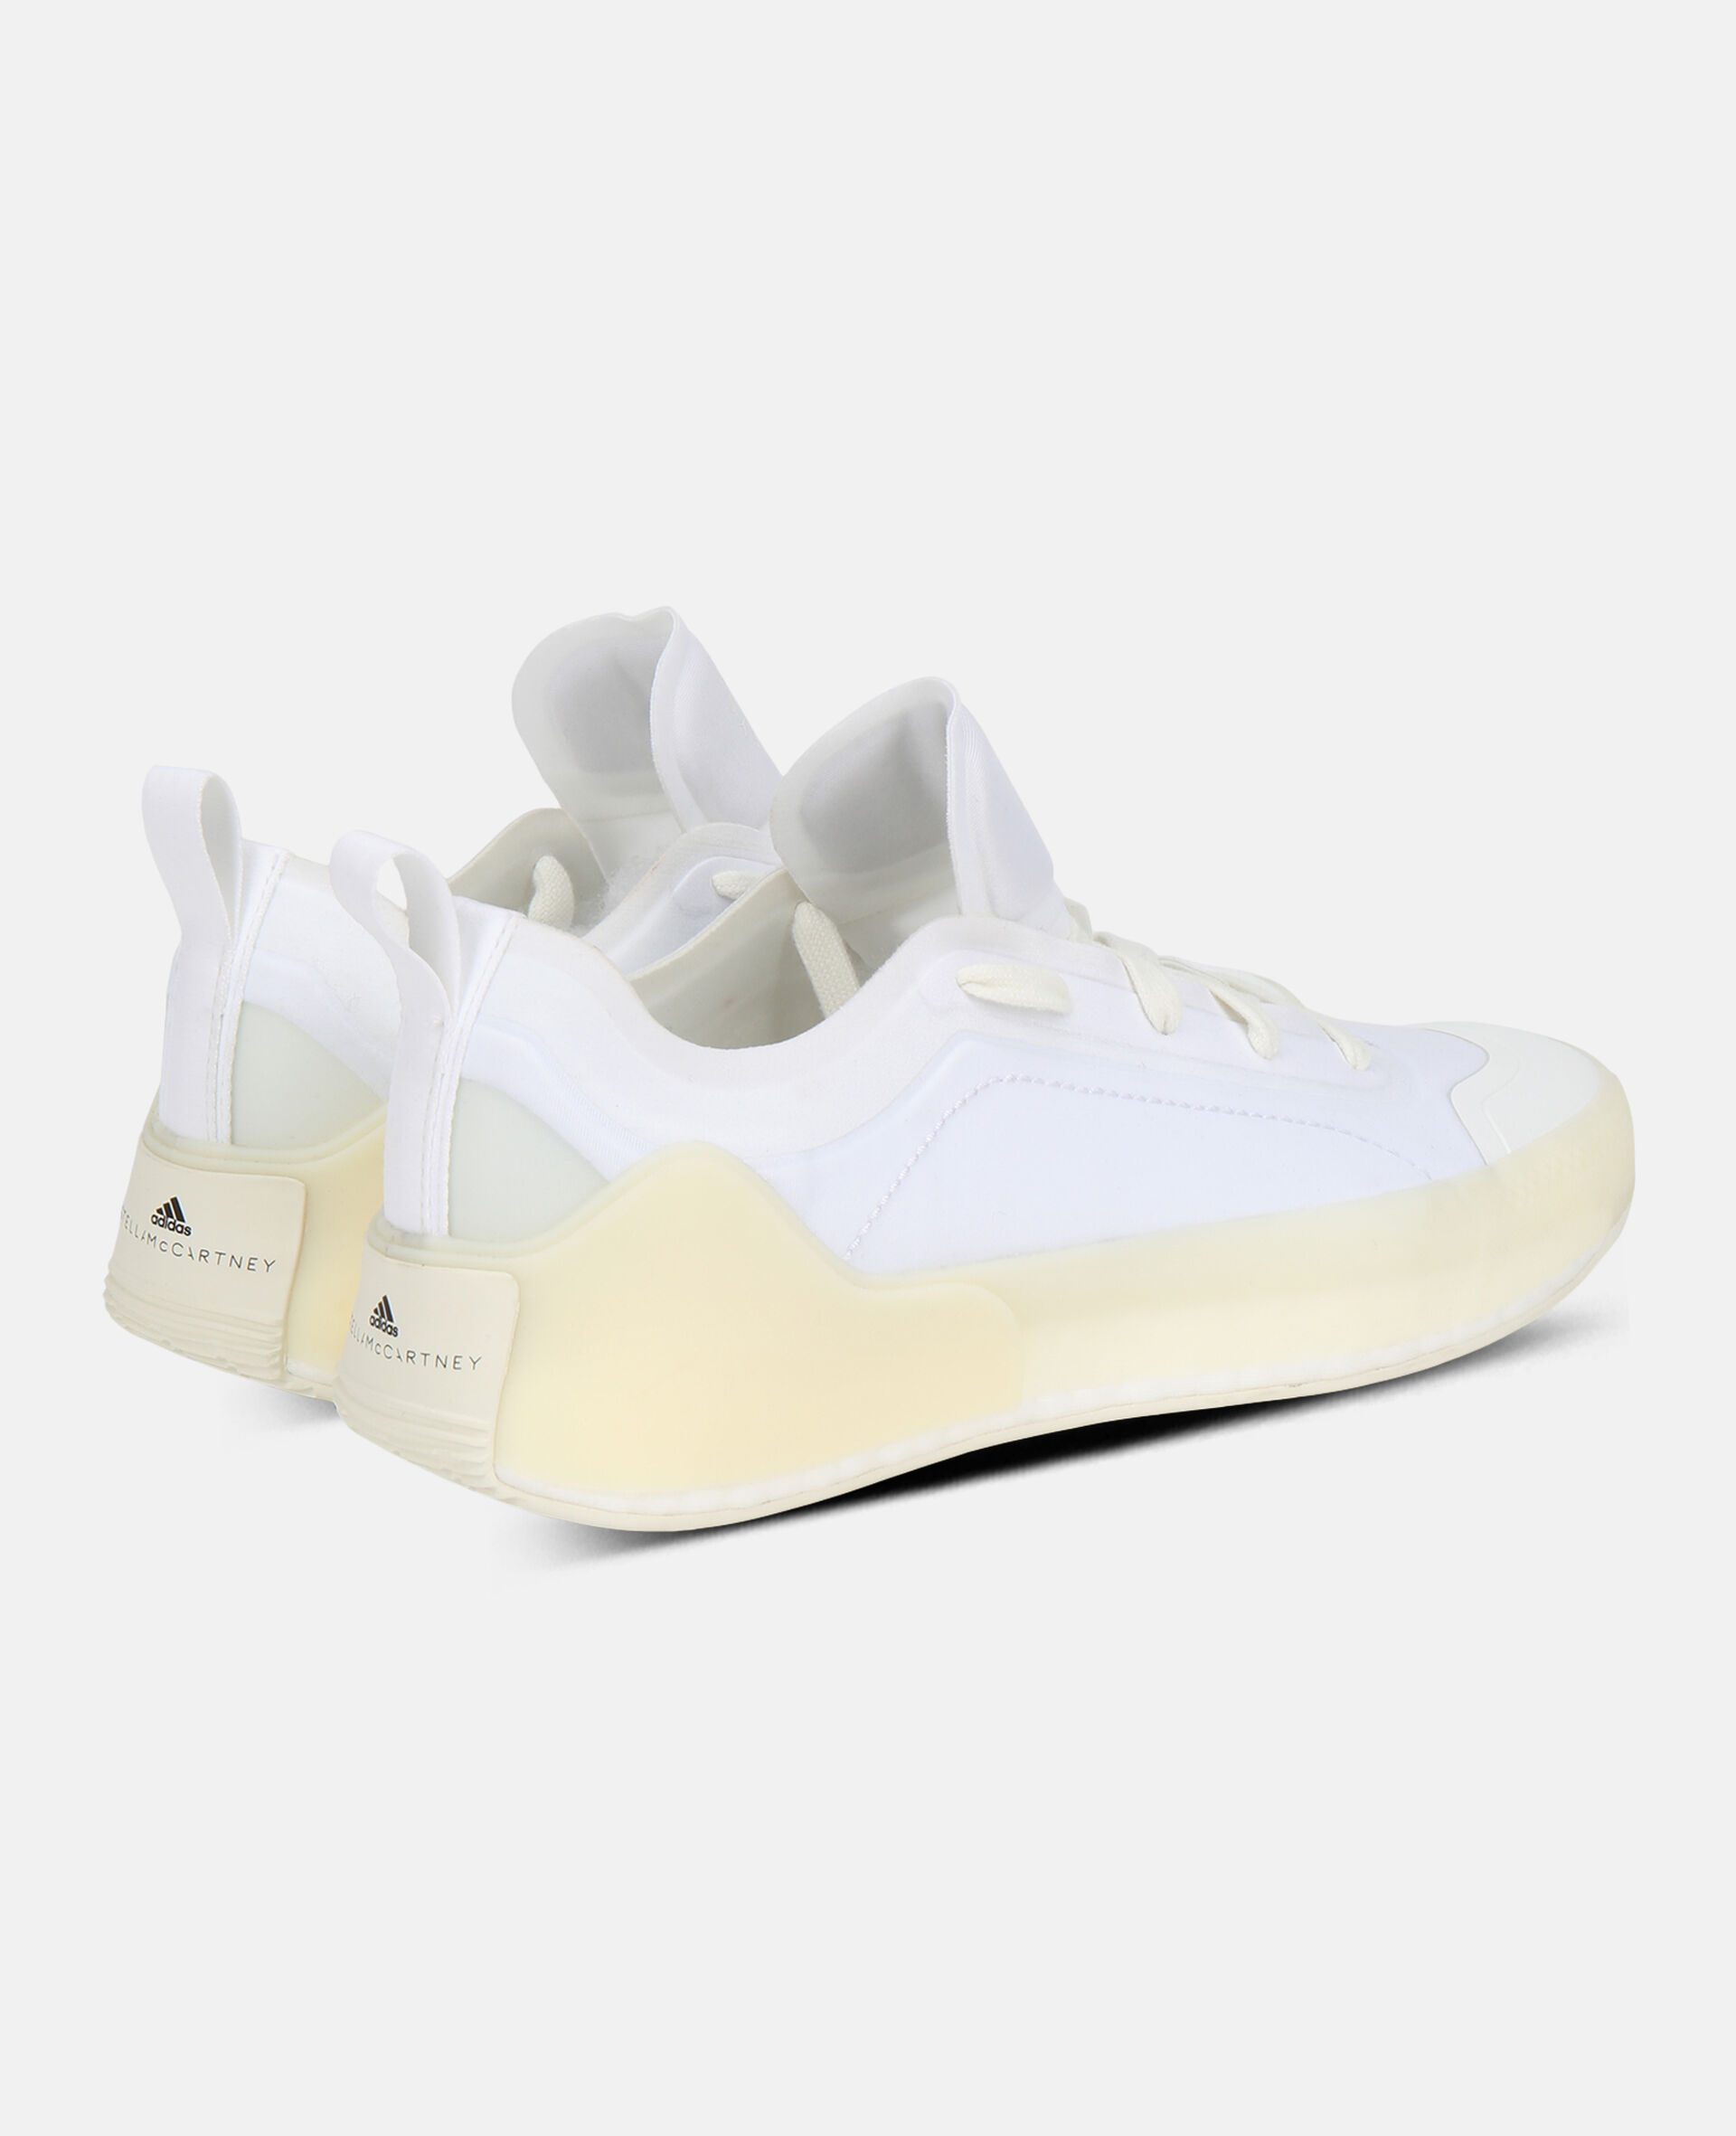 White Boost Treino Sneakers-White-large image number 6